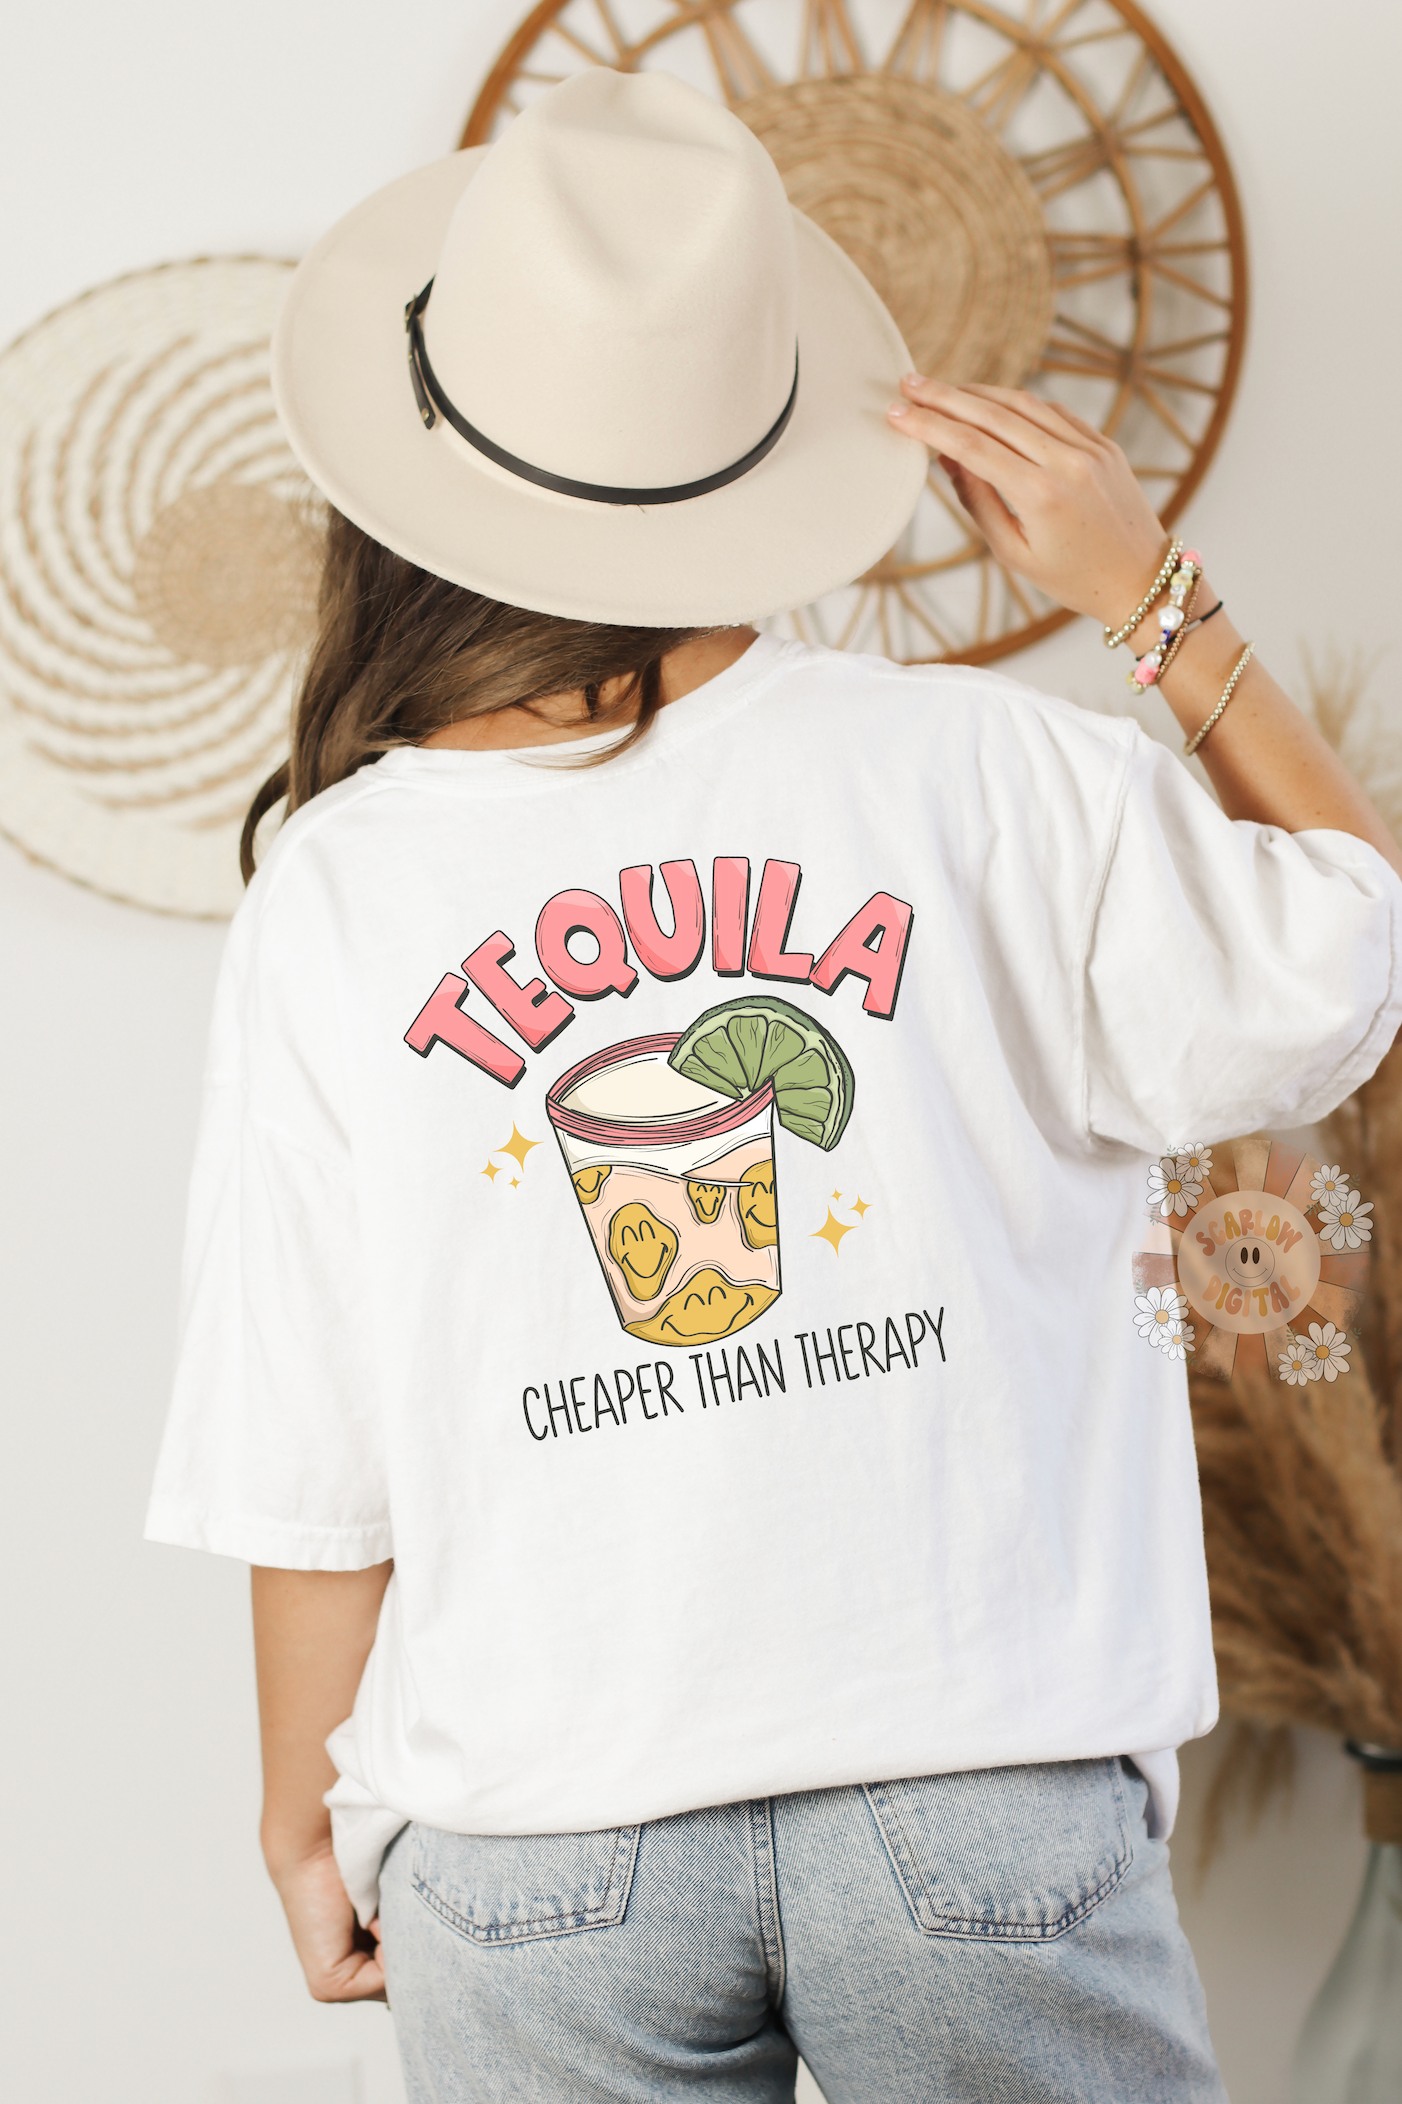 Cheaper Than Therapy PNG Pocket and Back Bundle-Tequila Sublimation Digital Design Download-drinking png, agave png, cinco de mayo png files